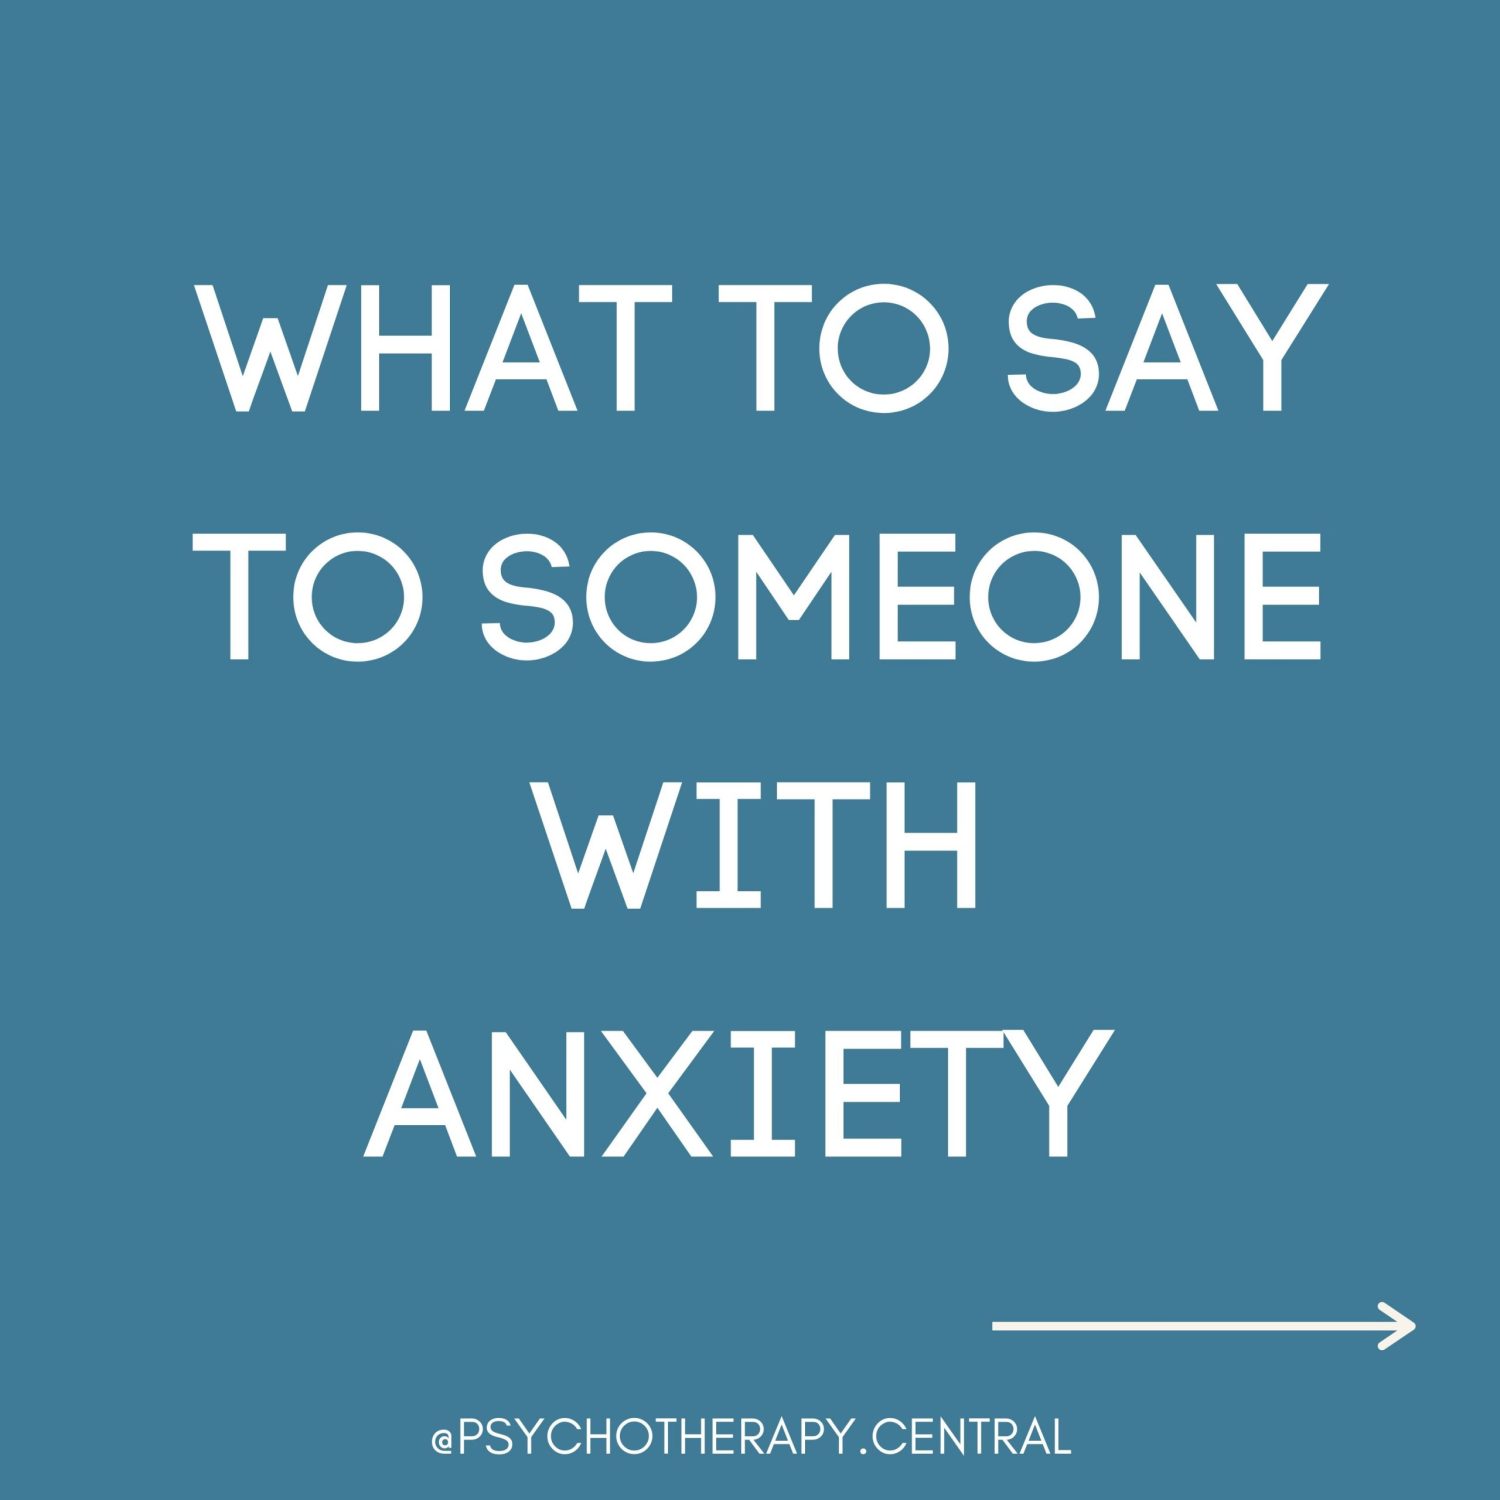 What To Say To Someone With Anxiety